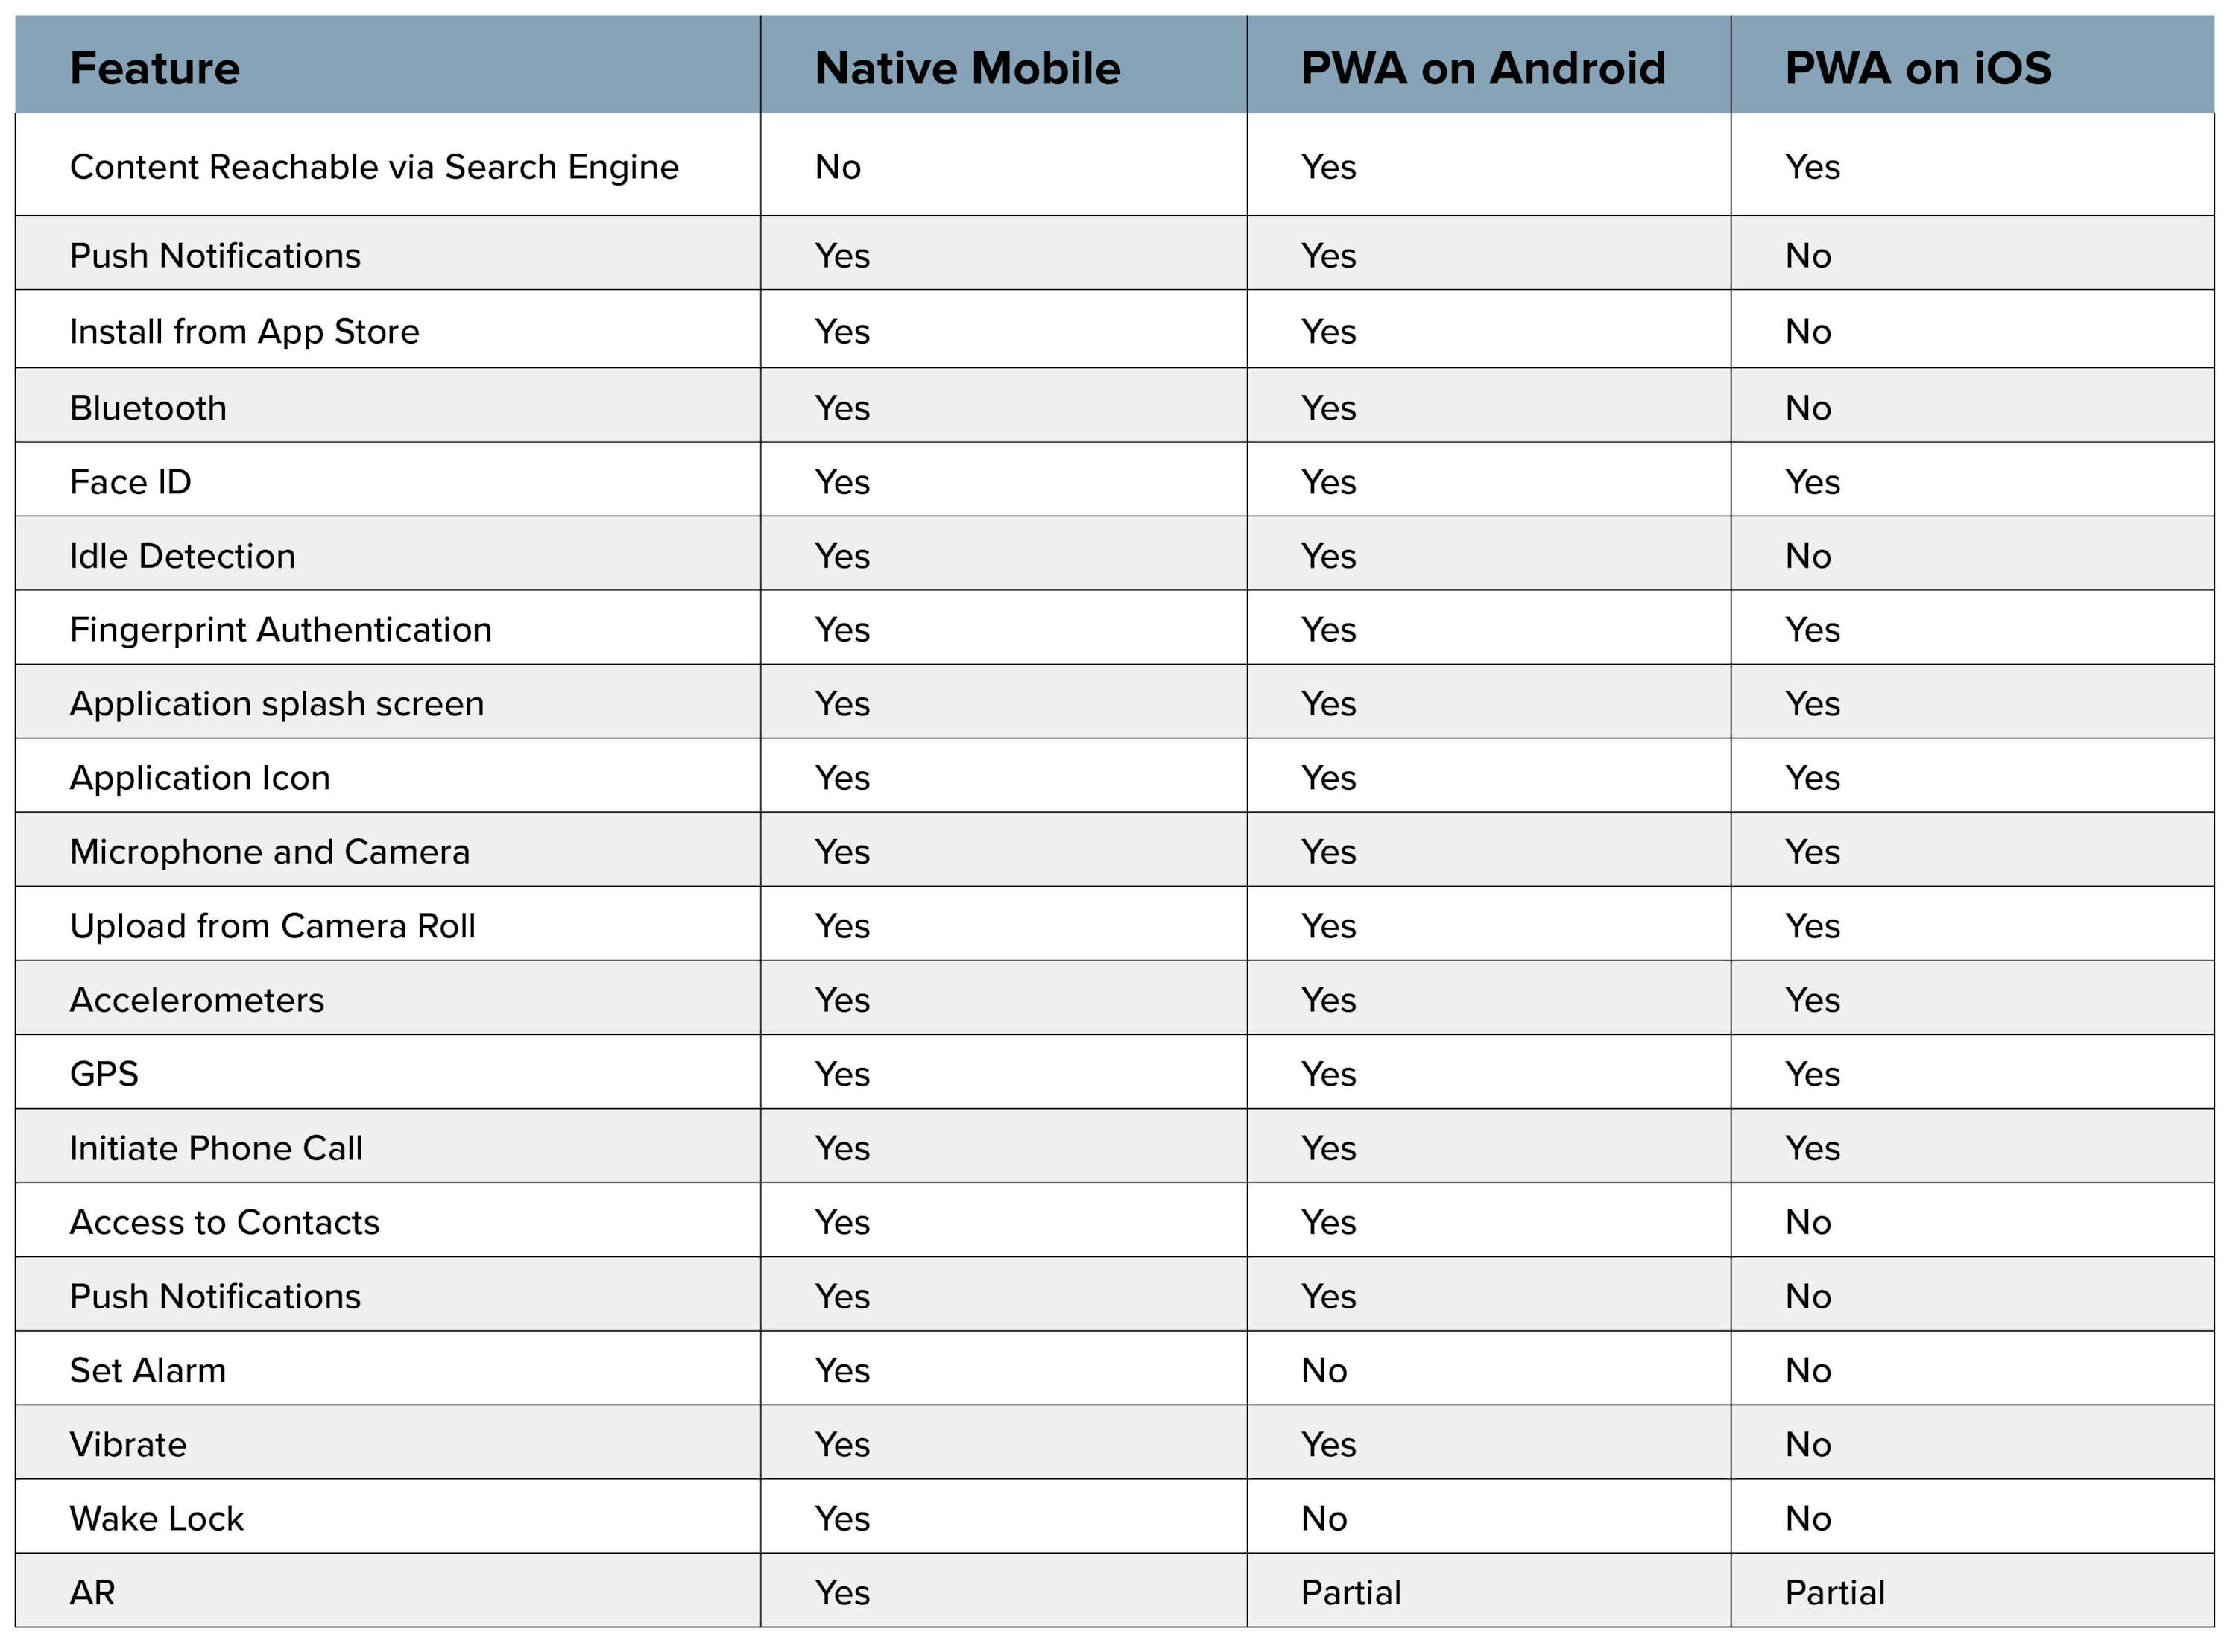 complete list of capability differences between native mobile, Android PWAs, iOS PWAs